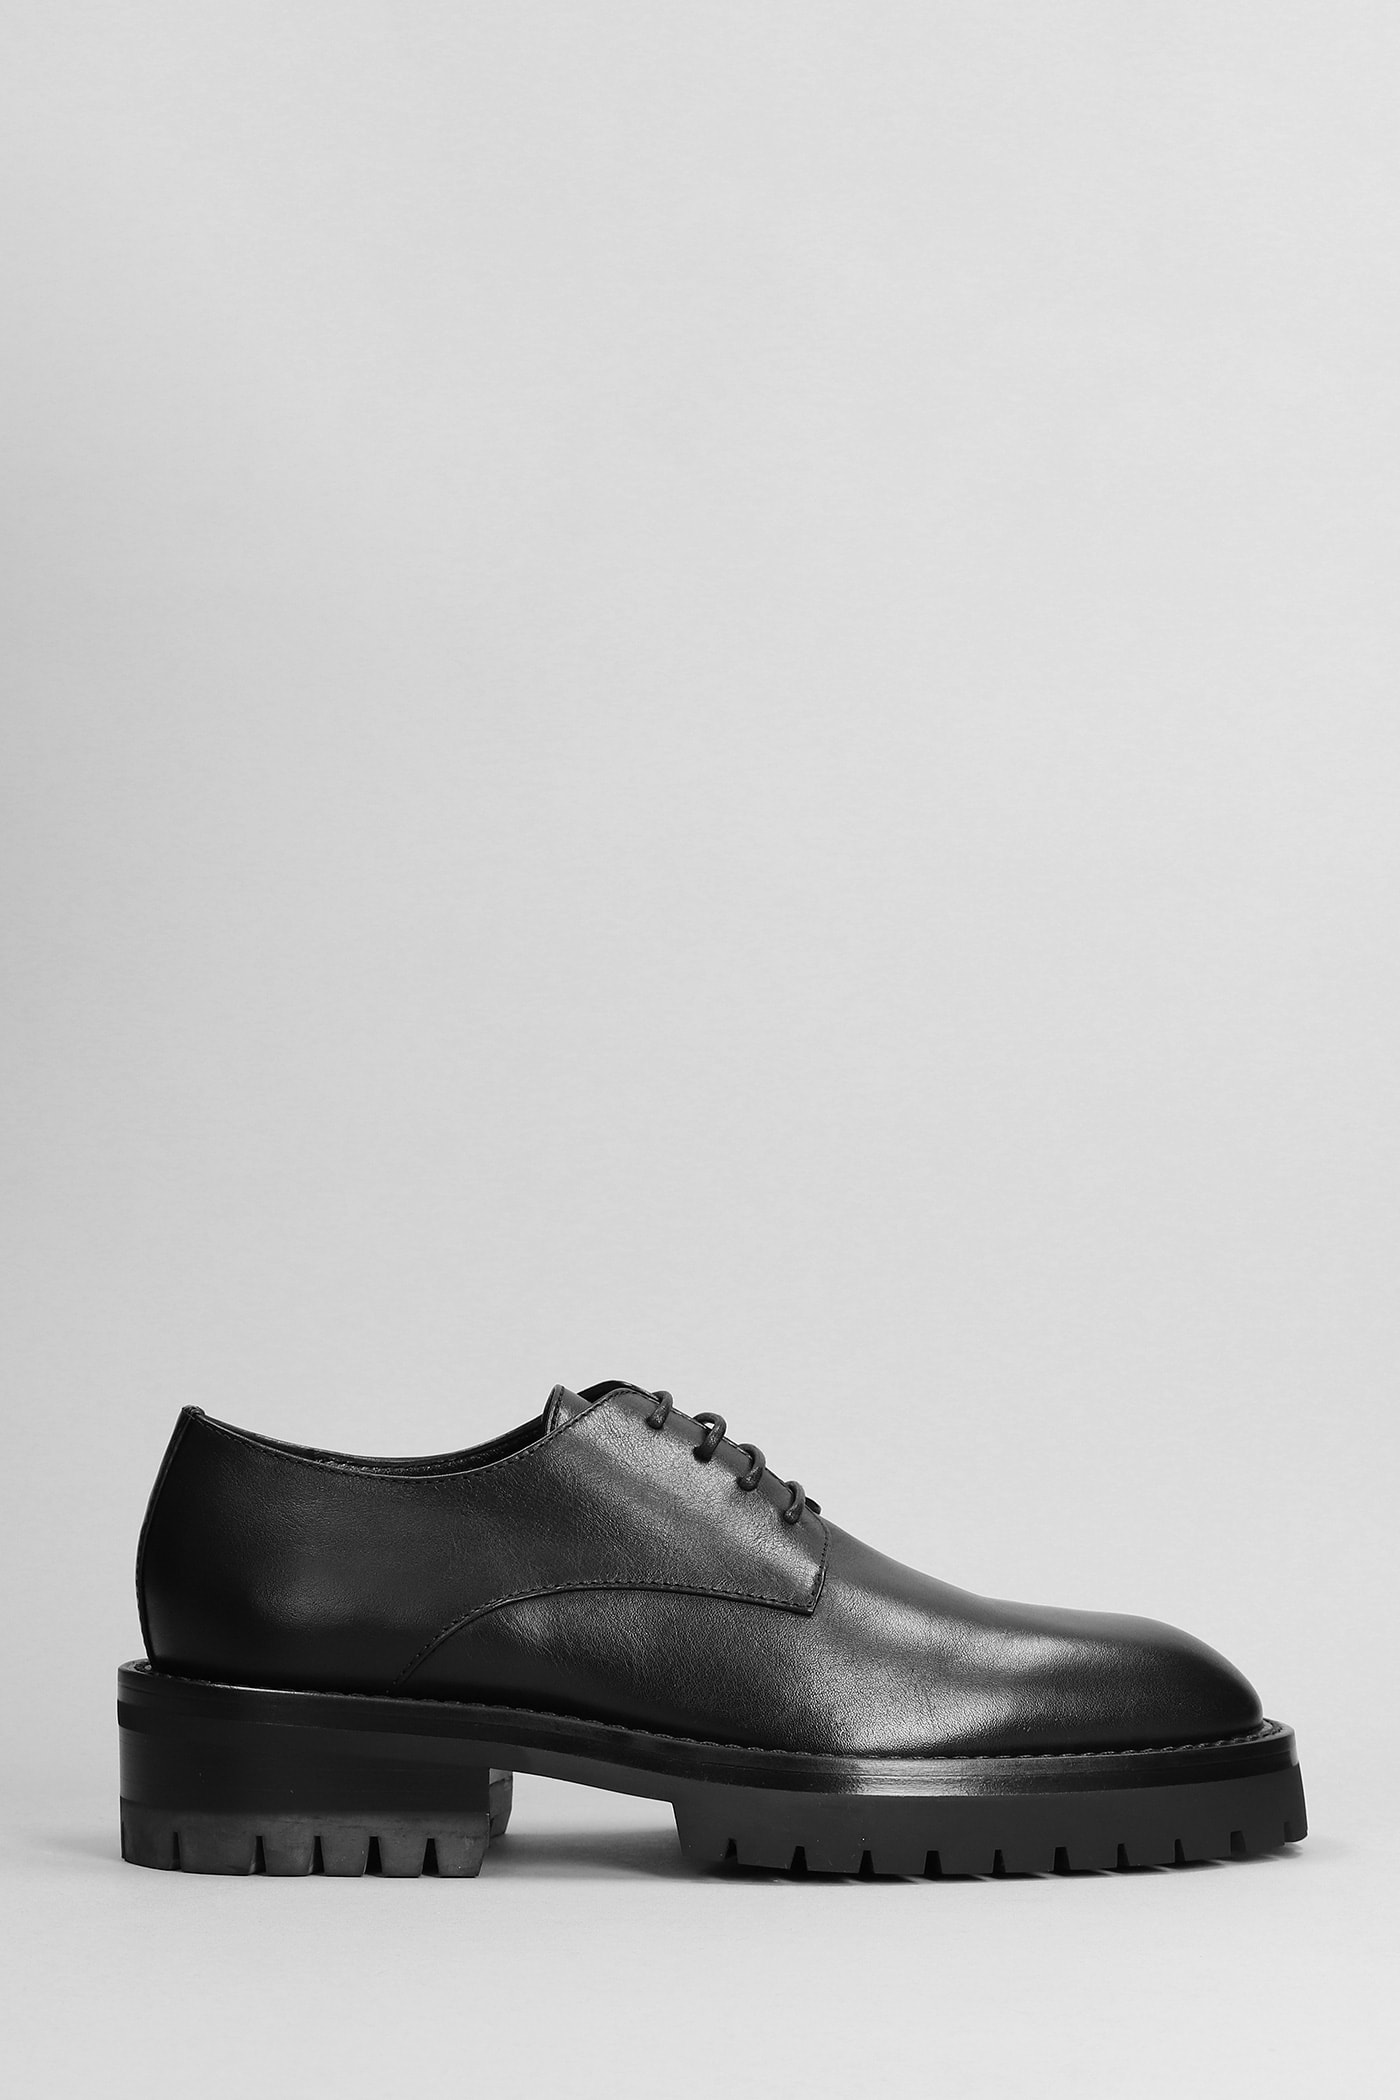 Ann Demeulemeester Lace Up Shoes In Black Leather